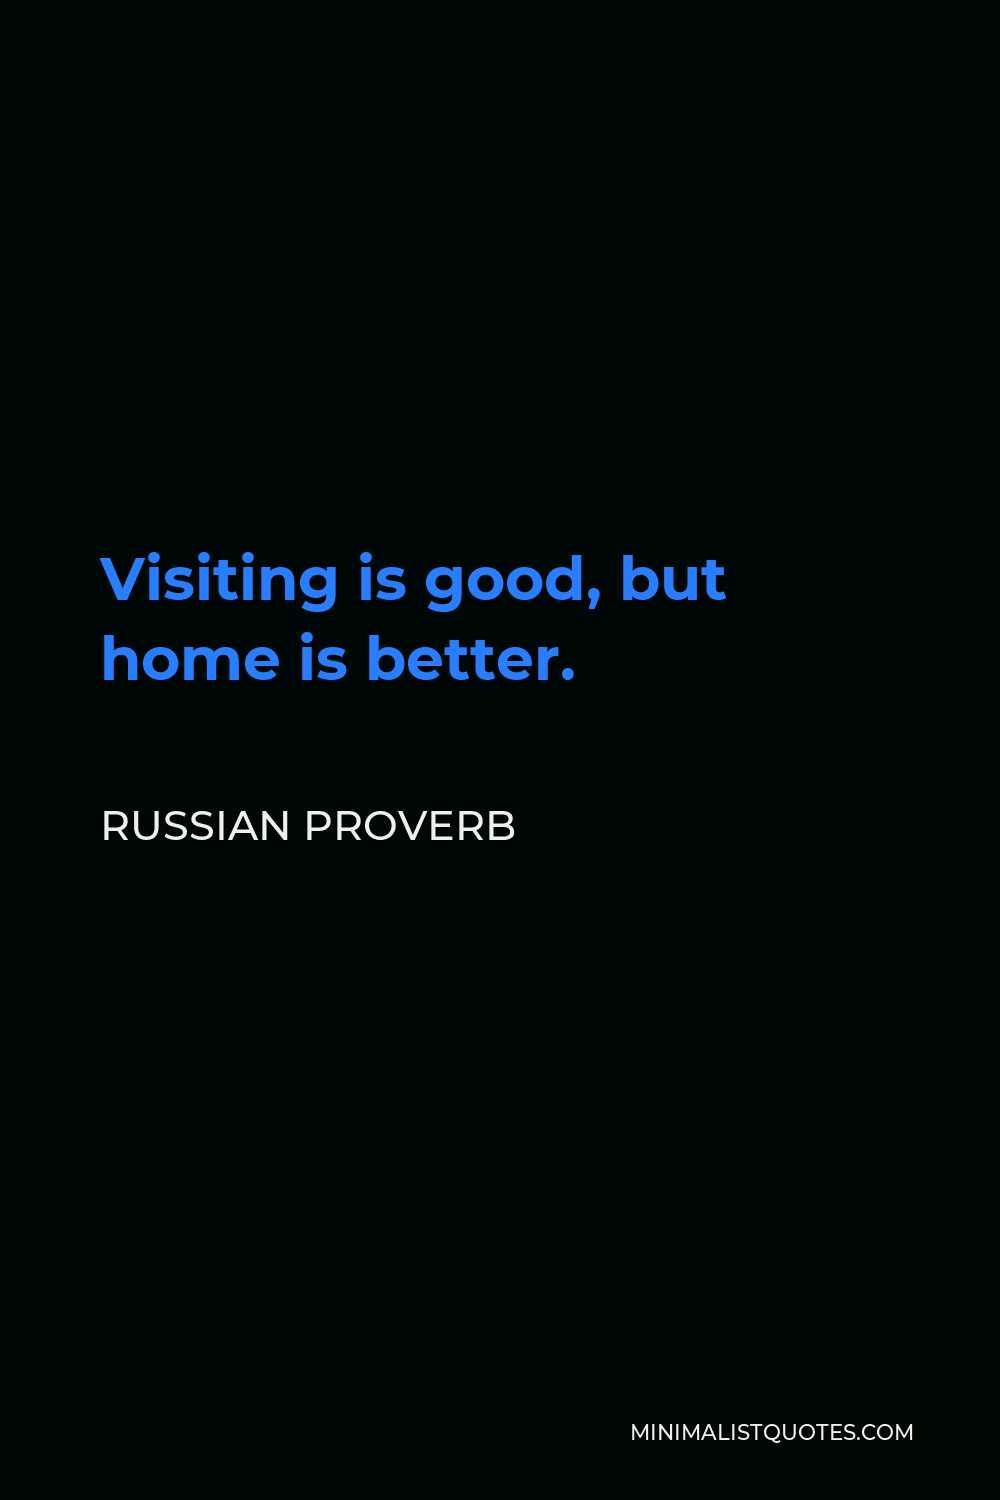 Russian Proverb Quote - Visiting is good, but home is better.